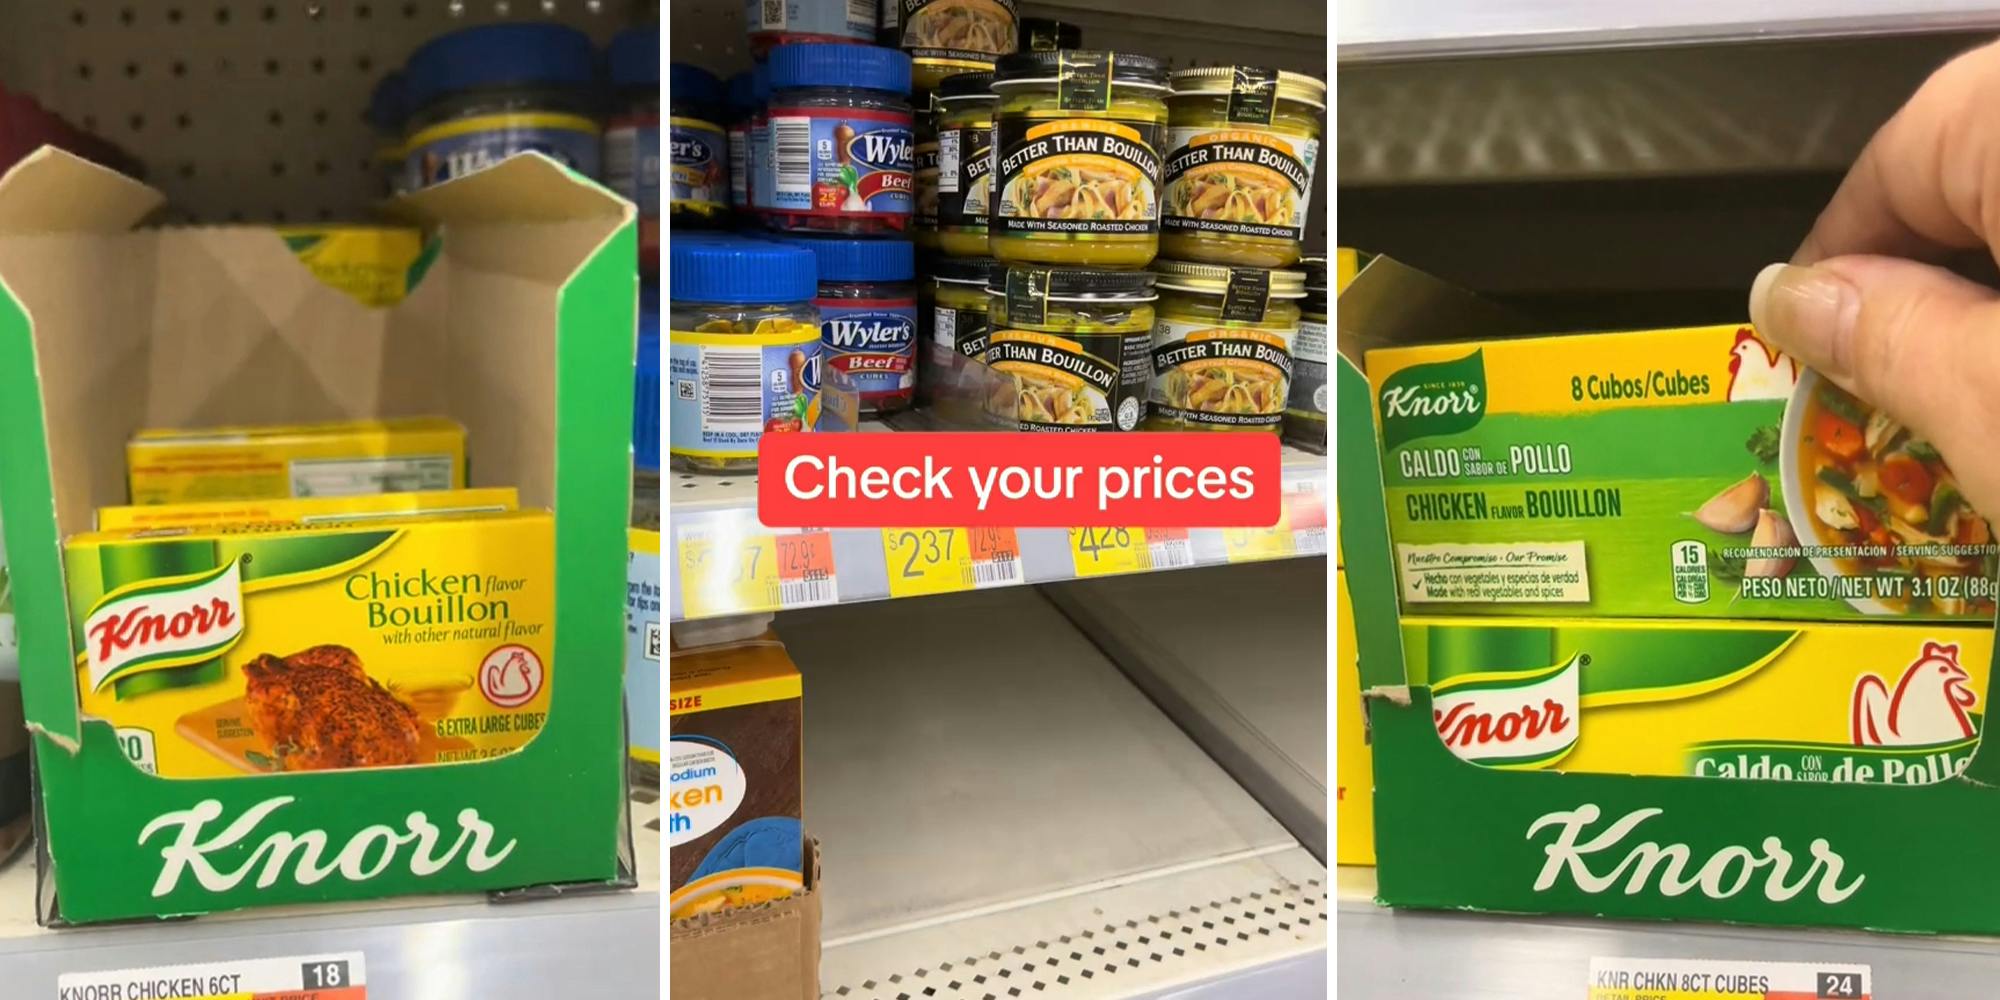 Customer finds exact same brand of chicken bouillon in Mexican aisle in different packaging for cheaper